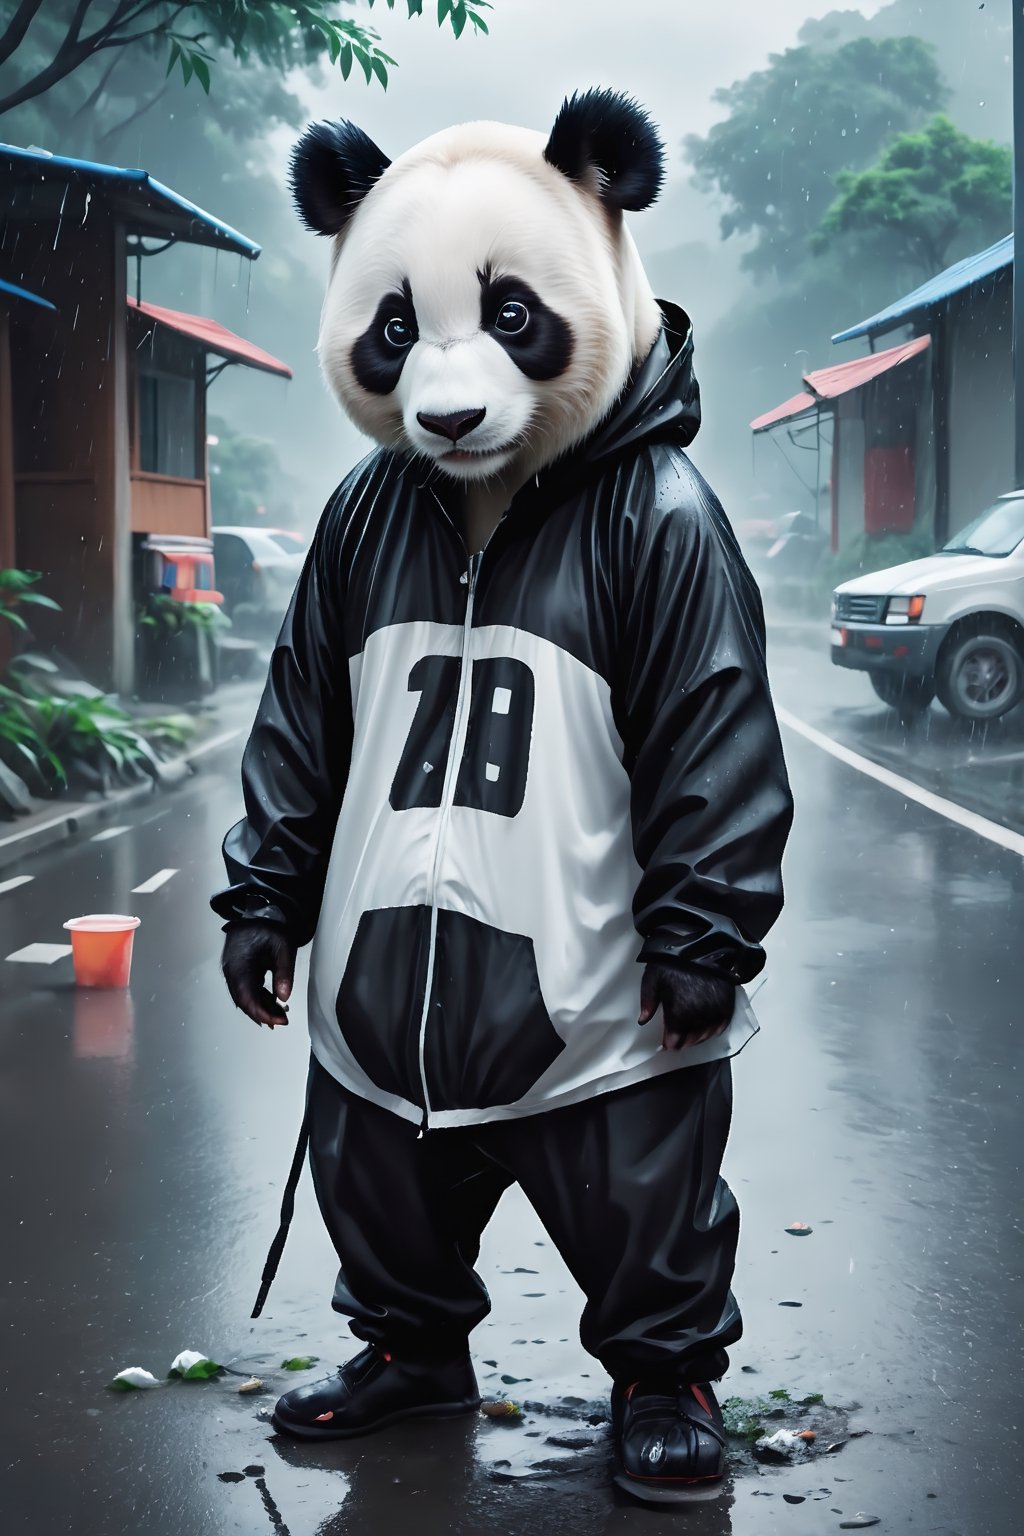 (((white panda, rainy, wet,)))++ panda wet from the rain in the middle of the road with a lot of trash on the ground. The black panda is in tears. The black panda is wearing only one dirty, torn piece of clothing. The black panda met an old white panda wearing glasses. Full 4k quality, 8k quality, ultra quality, ultra resolution, ultra details, cartoon style.

,large-eyed 